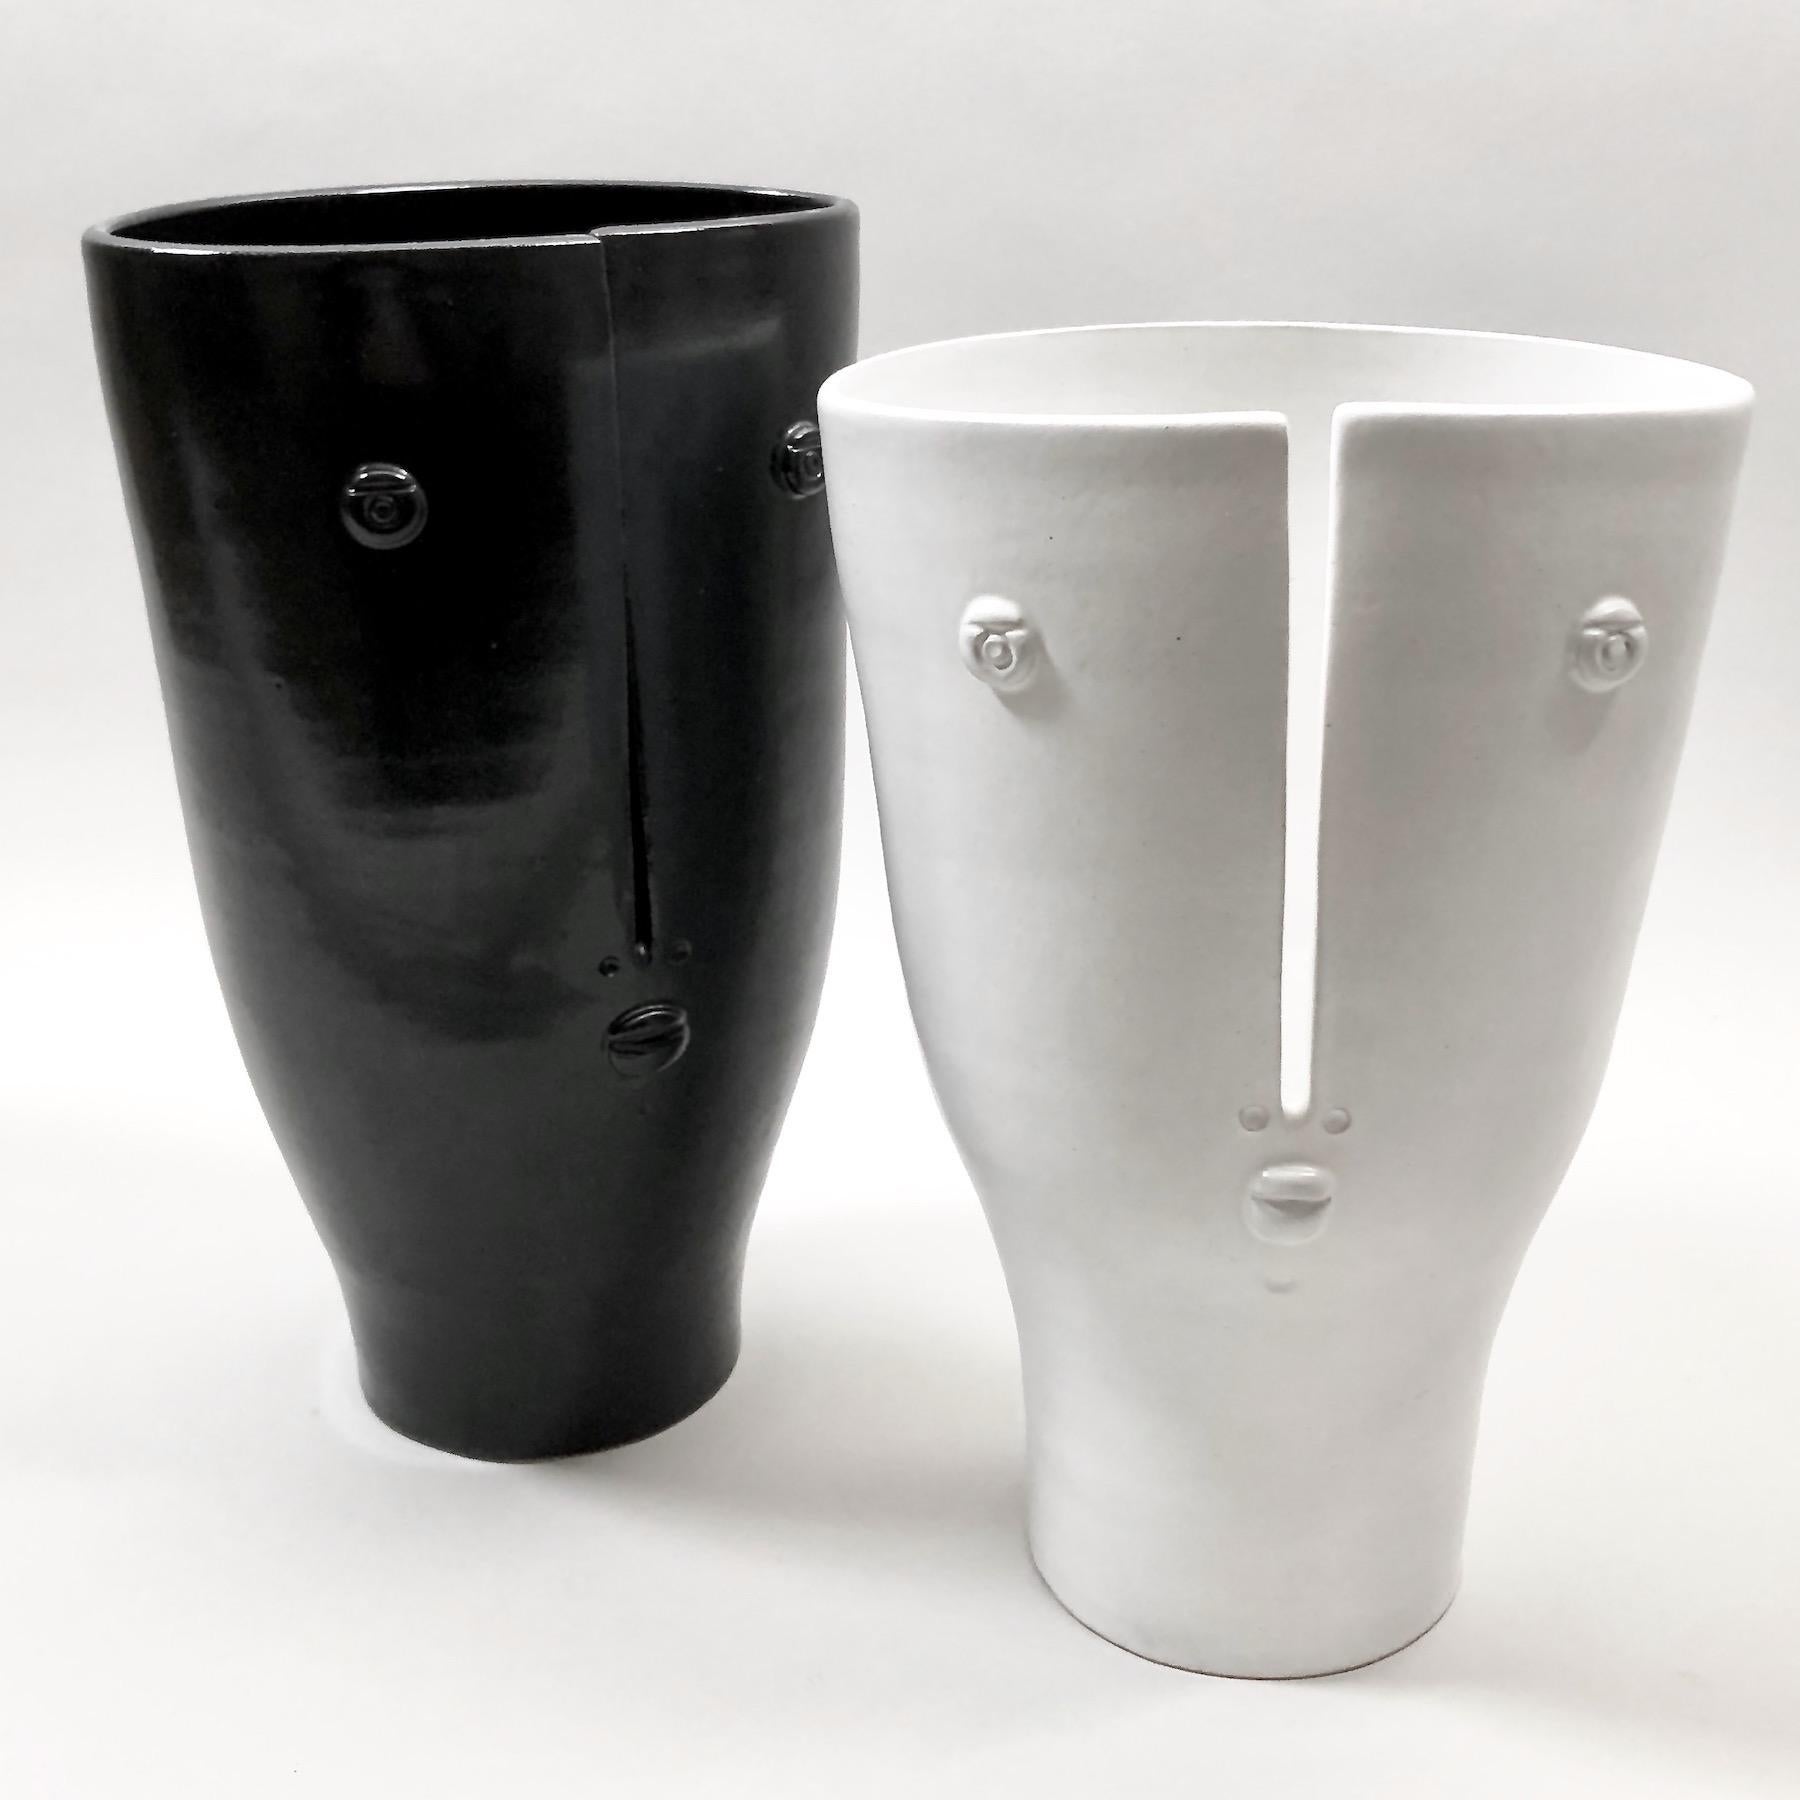 Figurative vases, called Idoles, ceramic enameled in black and white, decorated with stylized visages sculpted and incised front. 
One of a kind and exclusive handmade pieces, designed and signed by the French artists and ceramicists: Dalo